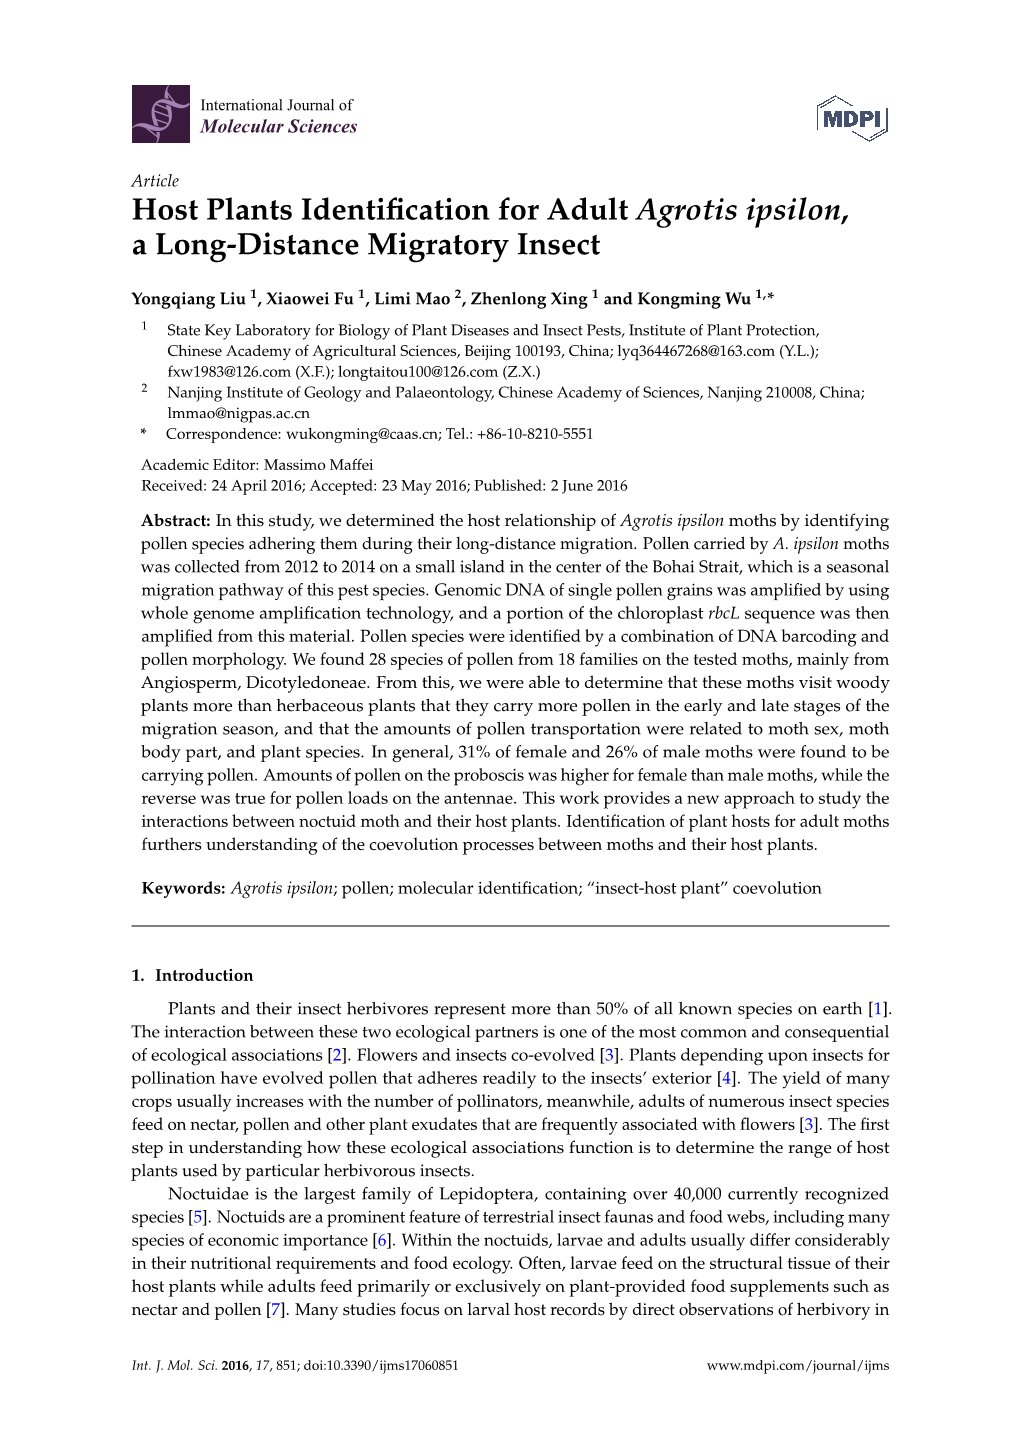 Host Plants Identification for Adult Agrotis Ipsilon, a Long-Distance Migratory Insect